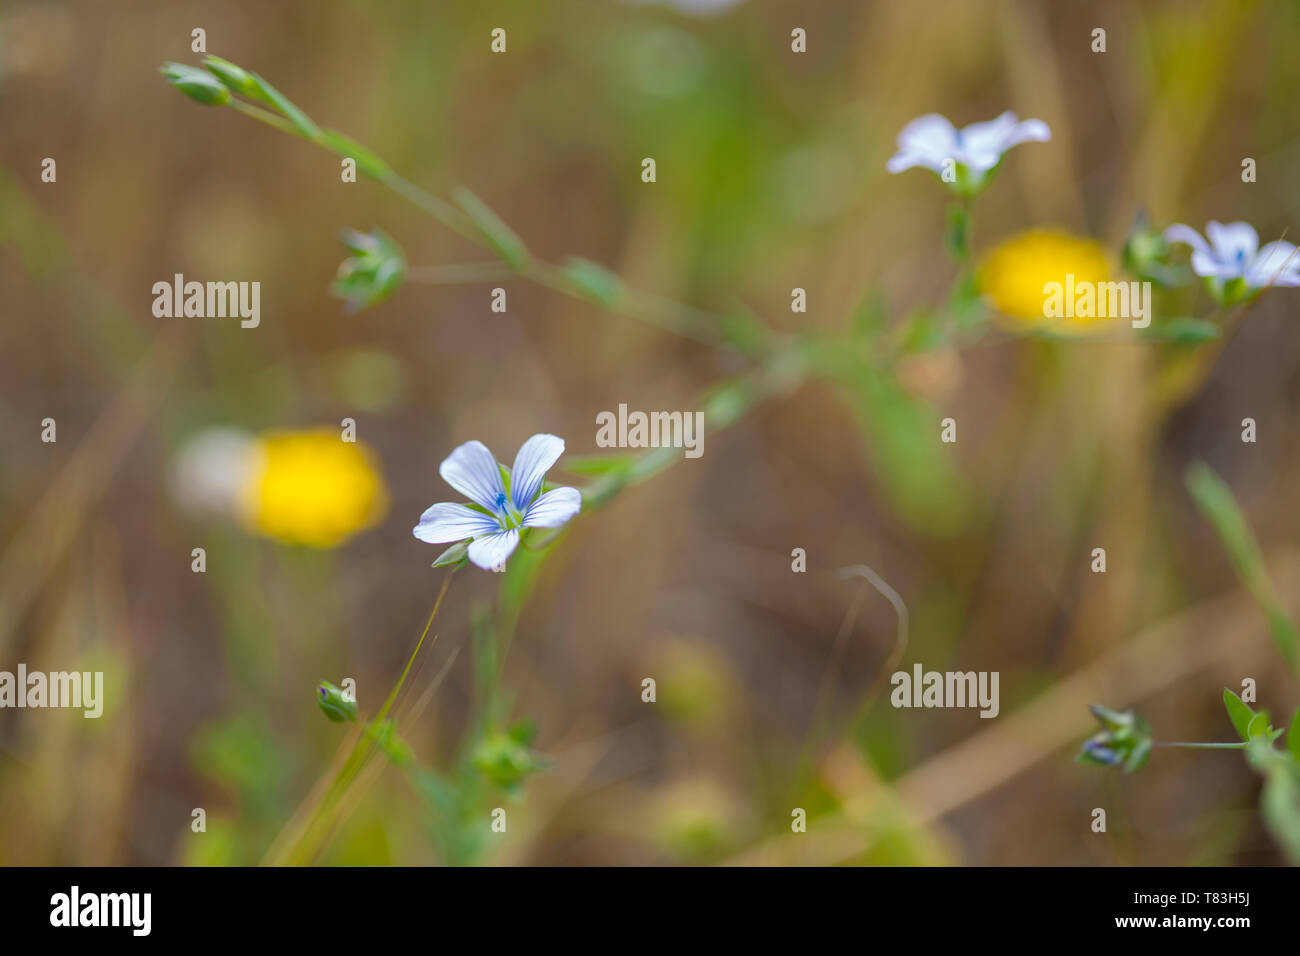 Flora of Gran Canaria - small blue flax flowers Linum bienne Stock Photo